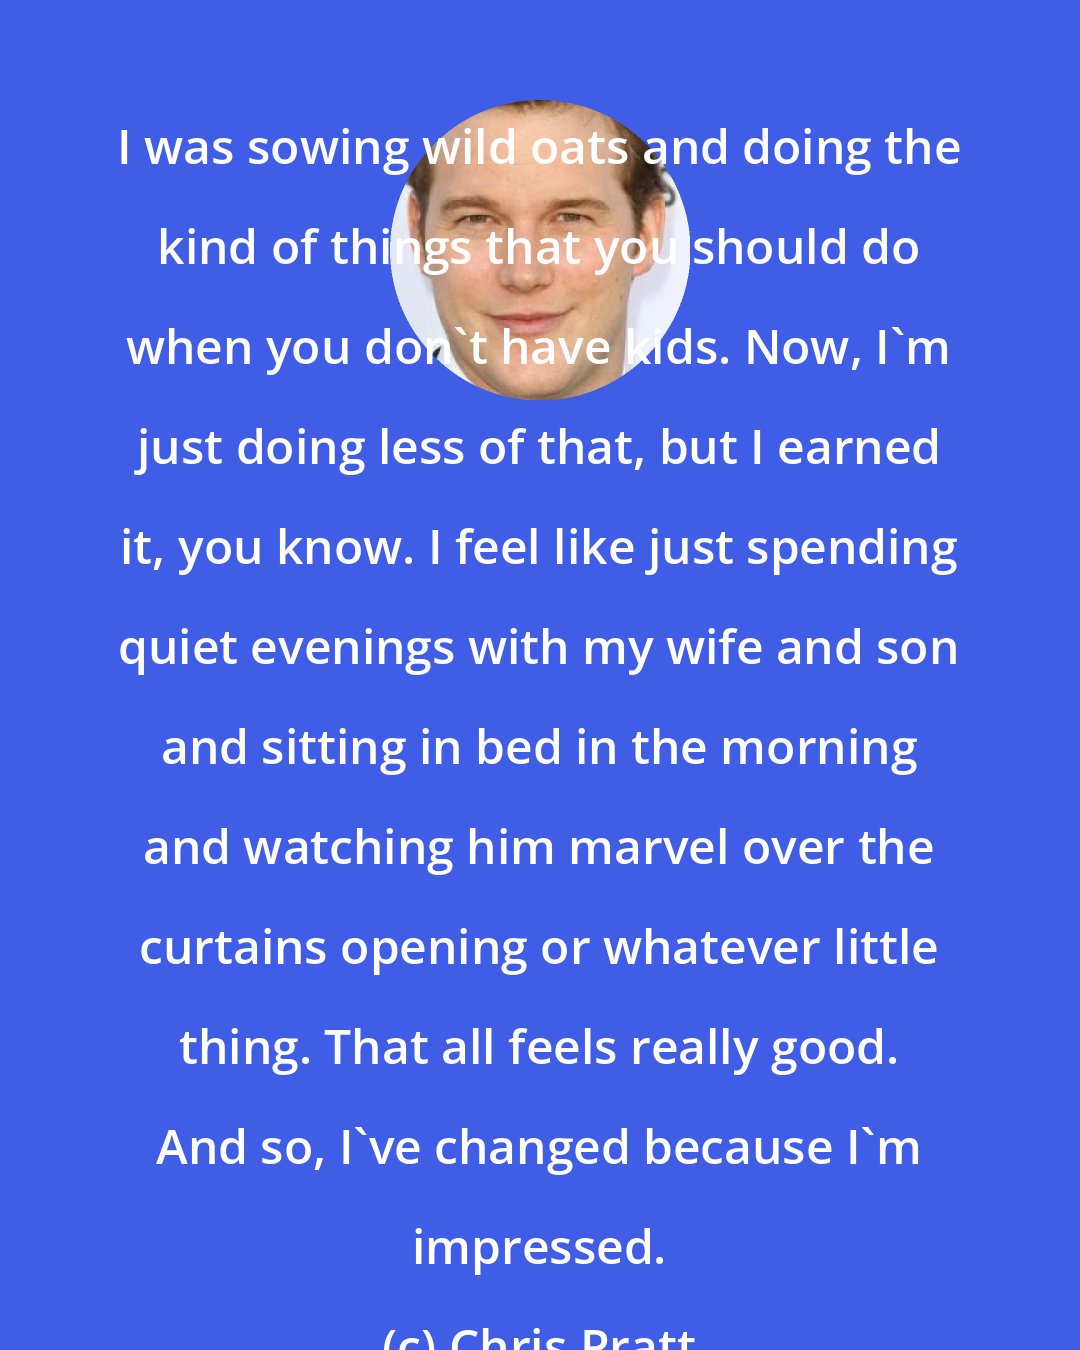 Chris Pratt: I was sowing wild oats and doing the kind of things that you should do when you don't have kids. Now, I'm just doing less of that, but I earned it, you know. I feel like just spending quiet evenings with my wife and son and sitting in bed in the morning and watching him marvel over the curtains opening or whatever little thing. That all feels really good. And so, I've changed because I'm impressed.